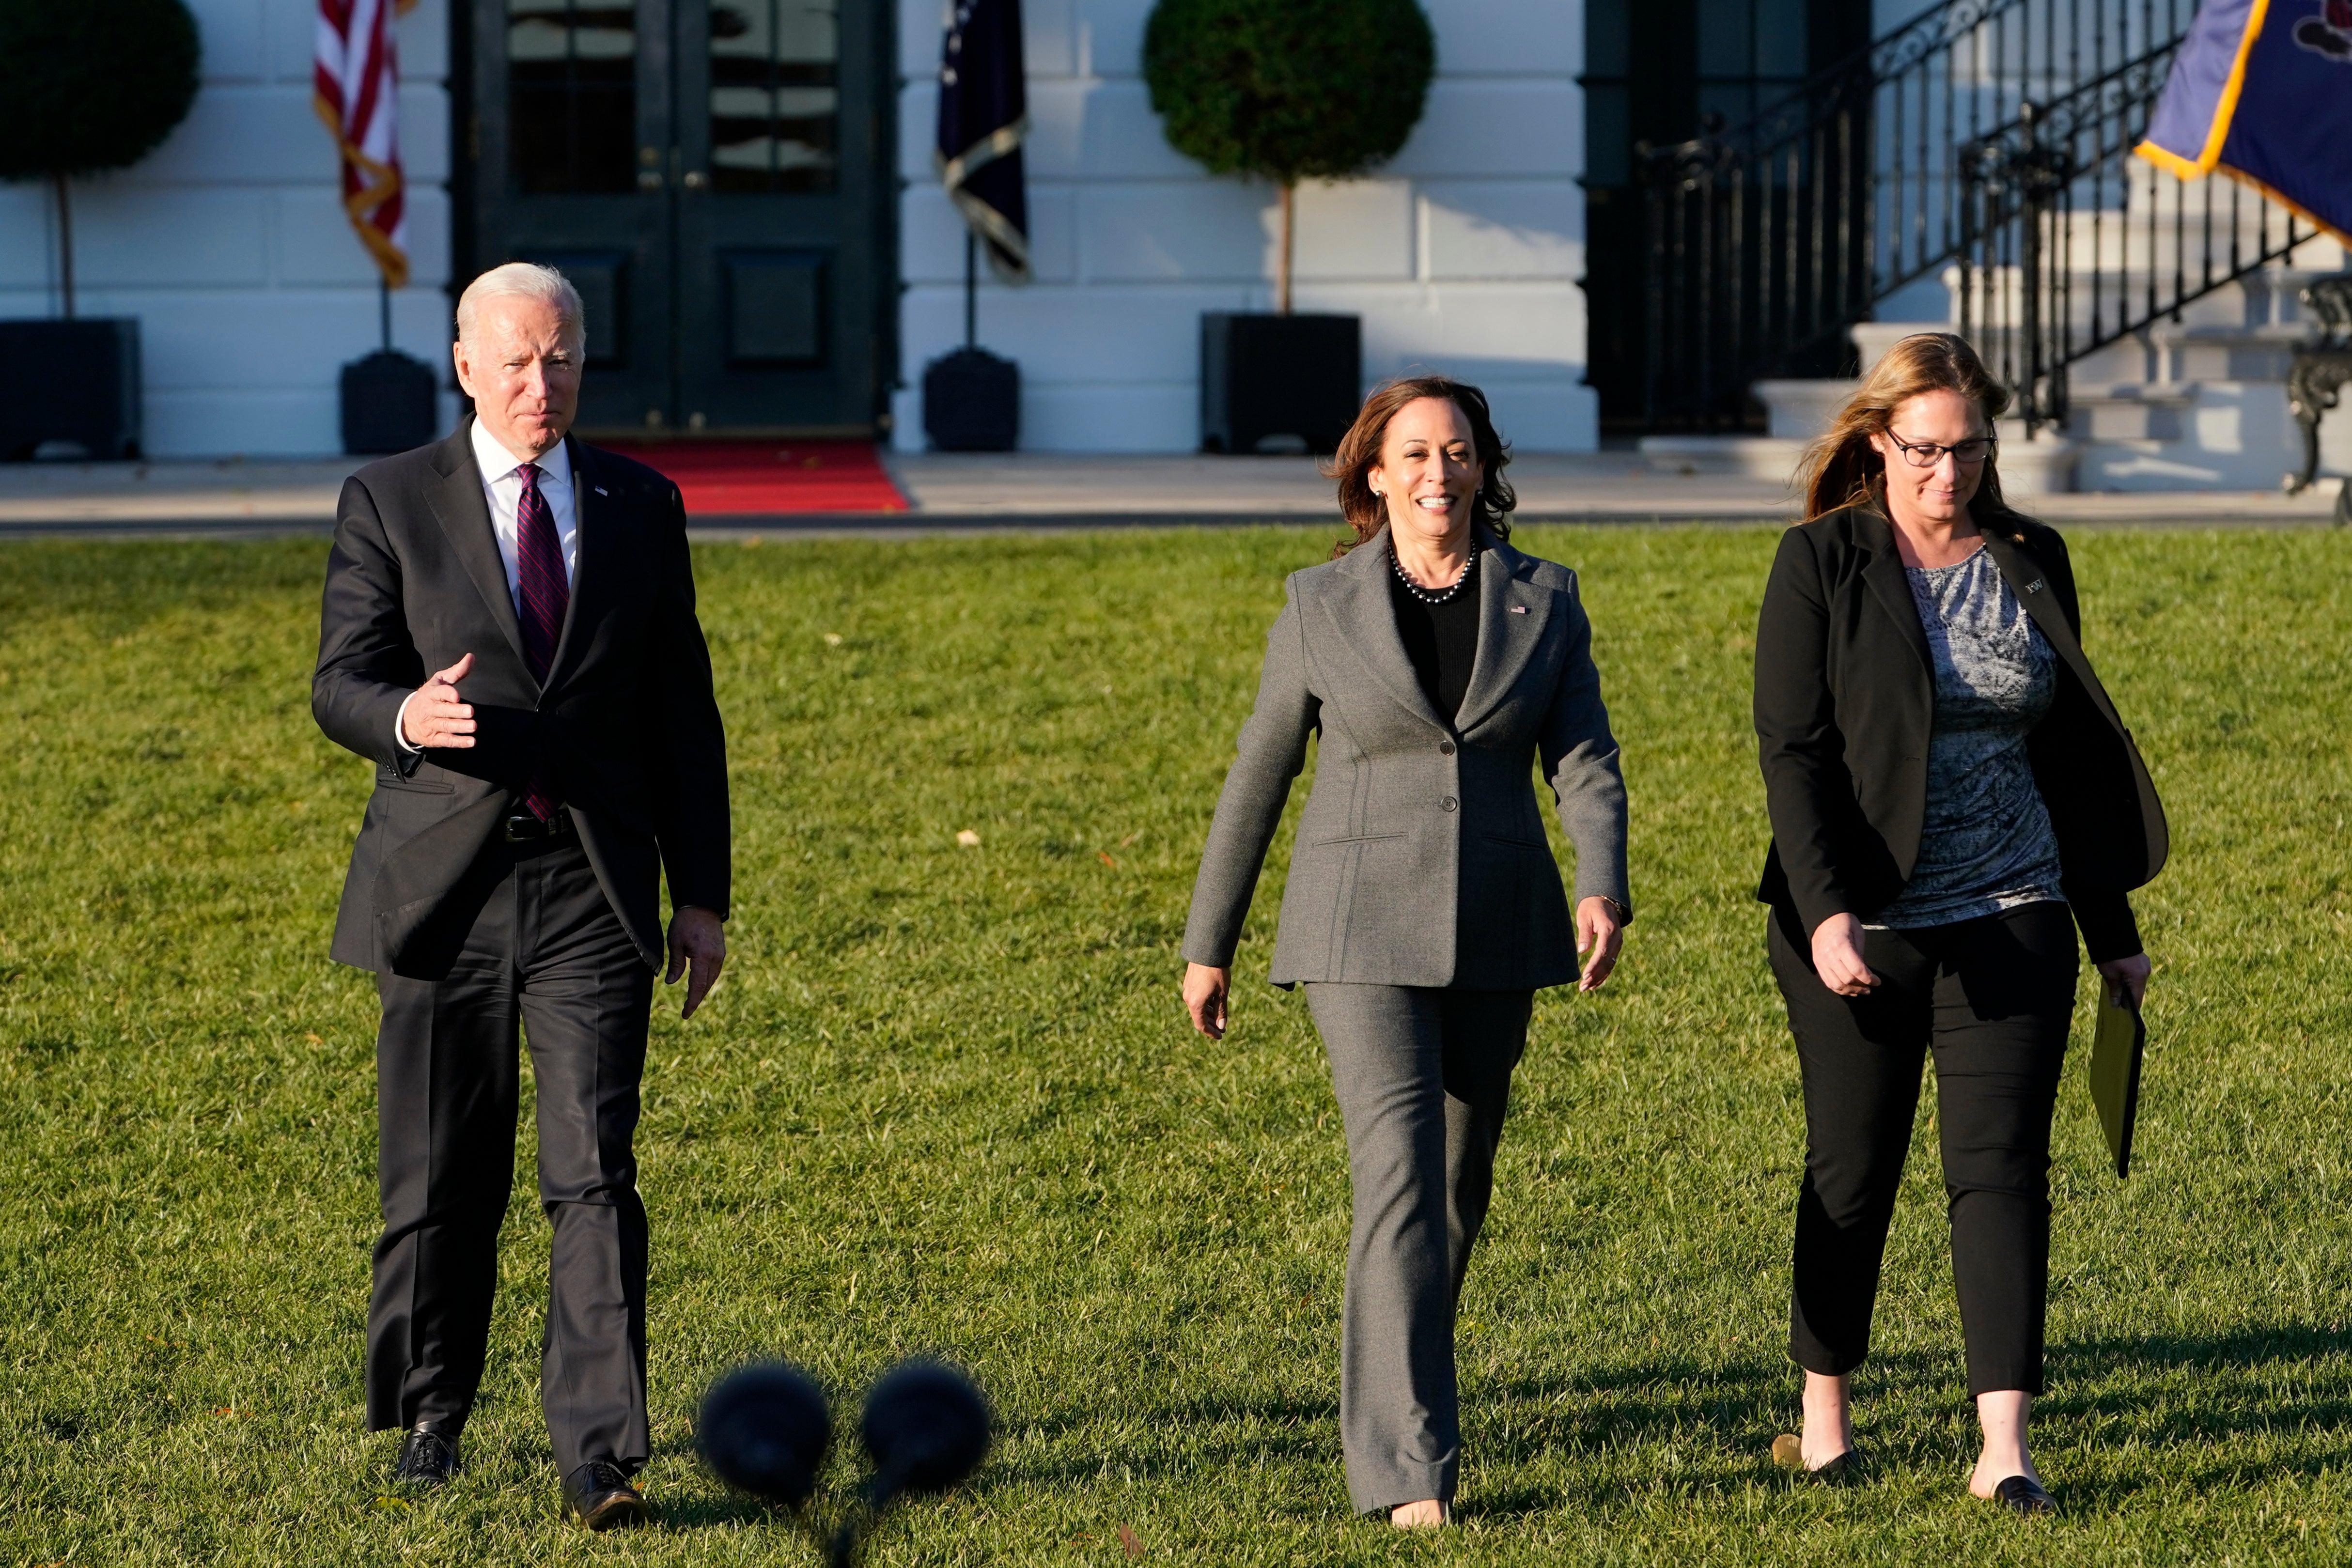 President Joe Biden, with Vice President Kamala Harris and Heather Kurtenbach, with Iron Workers Local 86 in Seattle, arrives to speak before signing the $1.2 trillion bipartisan infrastructure bill into law during a ceremony on the South Lawn of the White House in Washington, Monday, Nov. 15, 2021. (AP Photo/Susan Walsh)